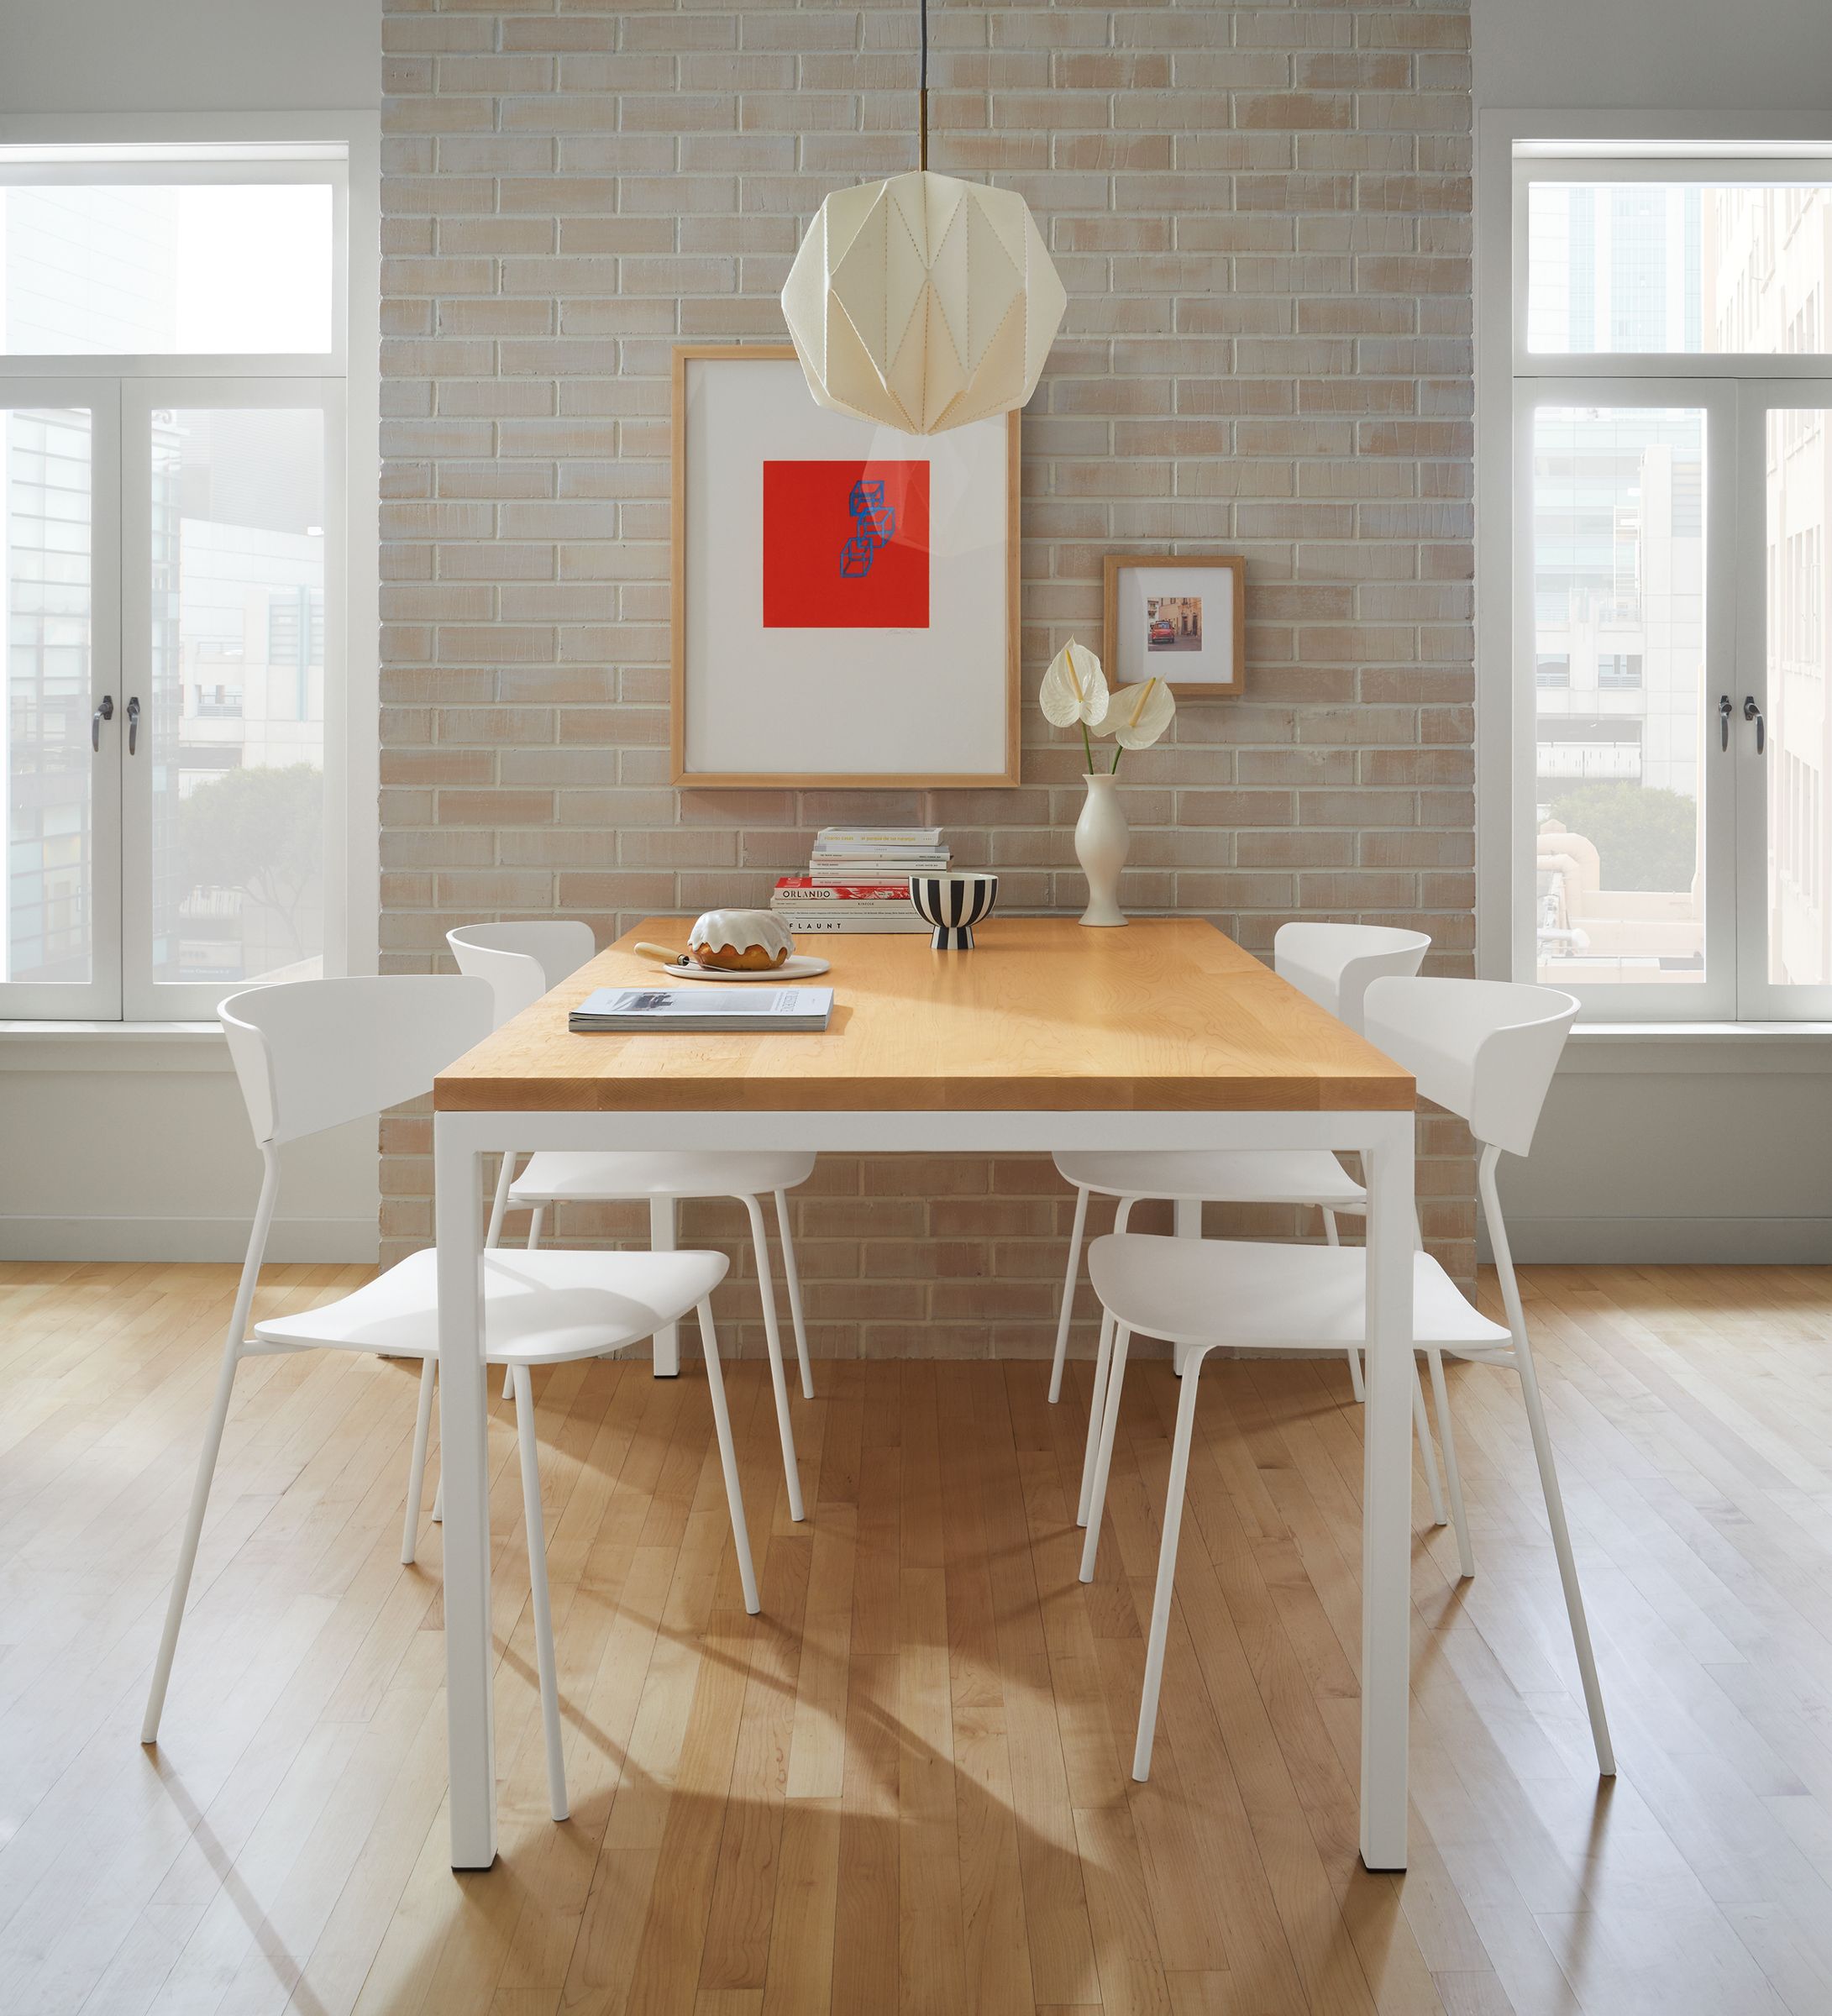 dining space with parsons table, wolfgang chairs, orikata pendant, juni van dyke wall art.